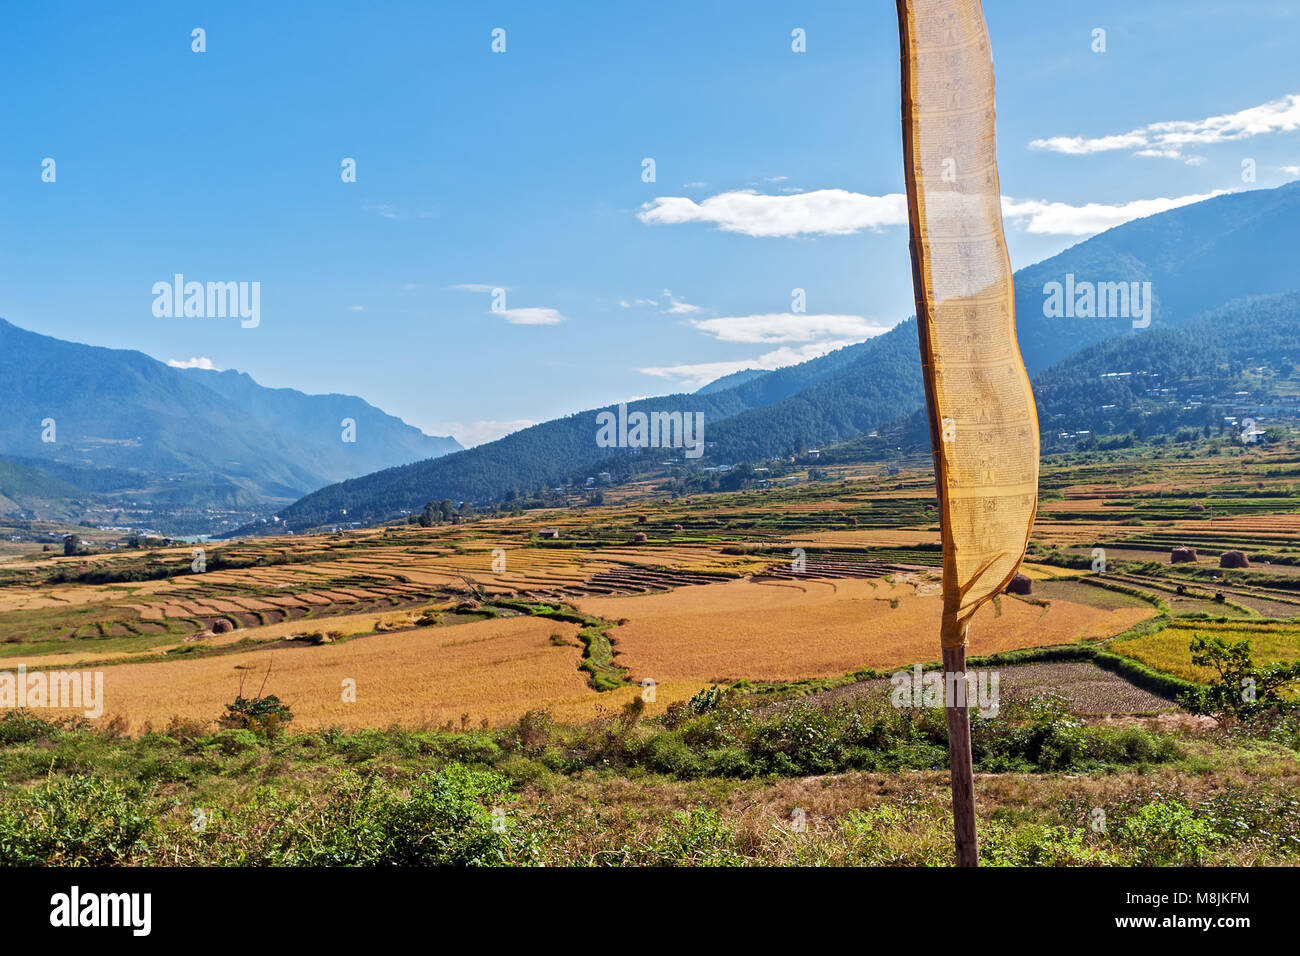 Picturesque agricultural landscape in rural Bhutan Stock Photo